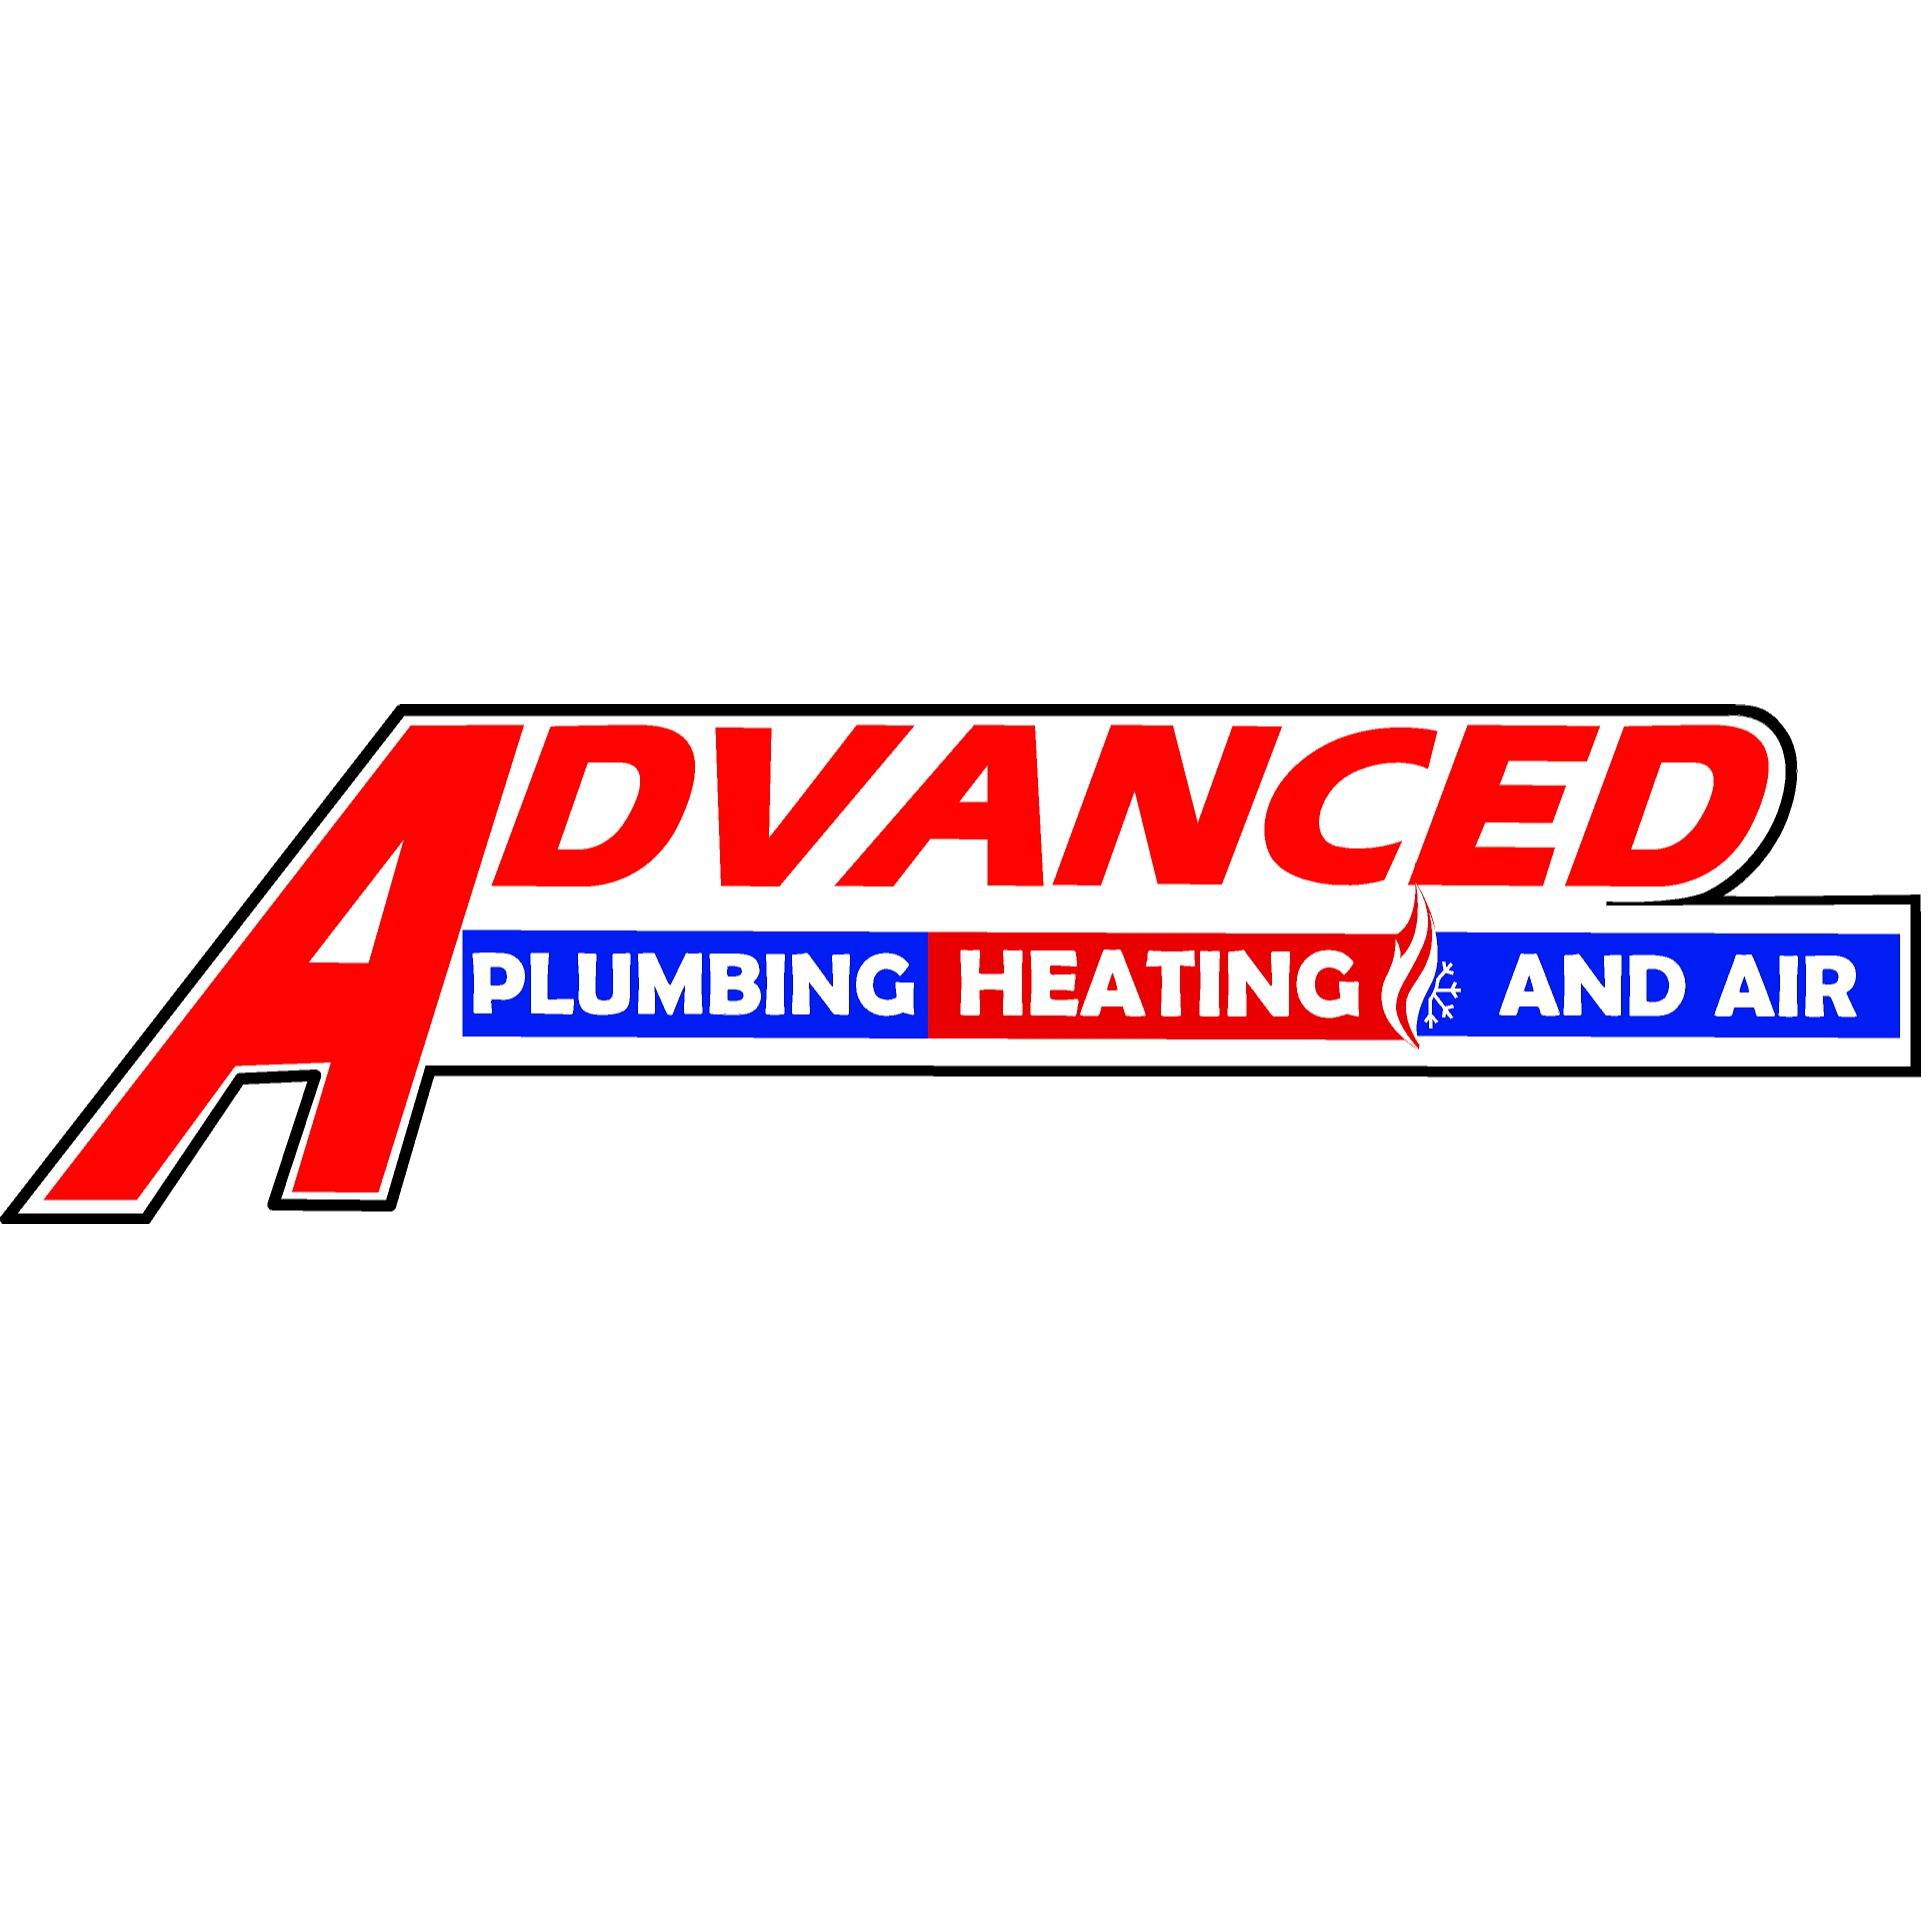 Advanced Plumbing Heating and Air - Vacaville, CA 95687 - (707)446-1800 | ShowMeLocal.com